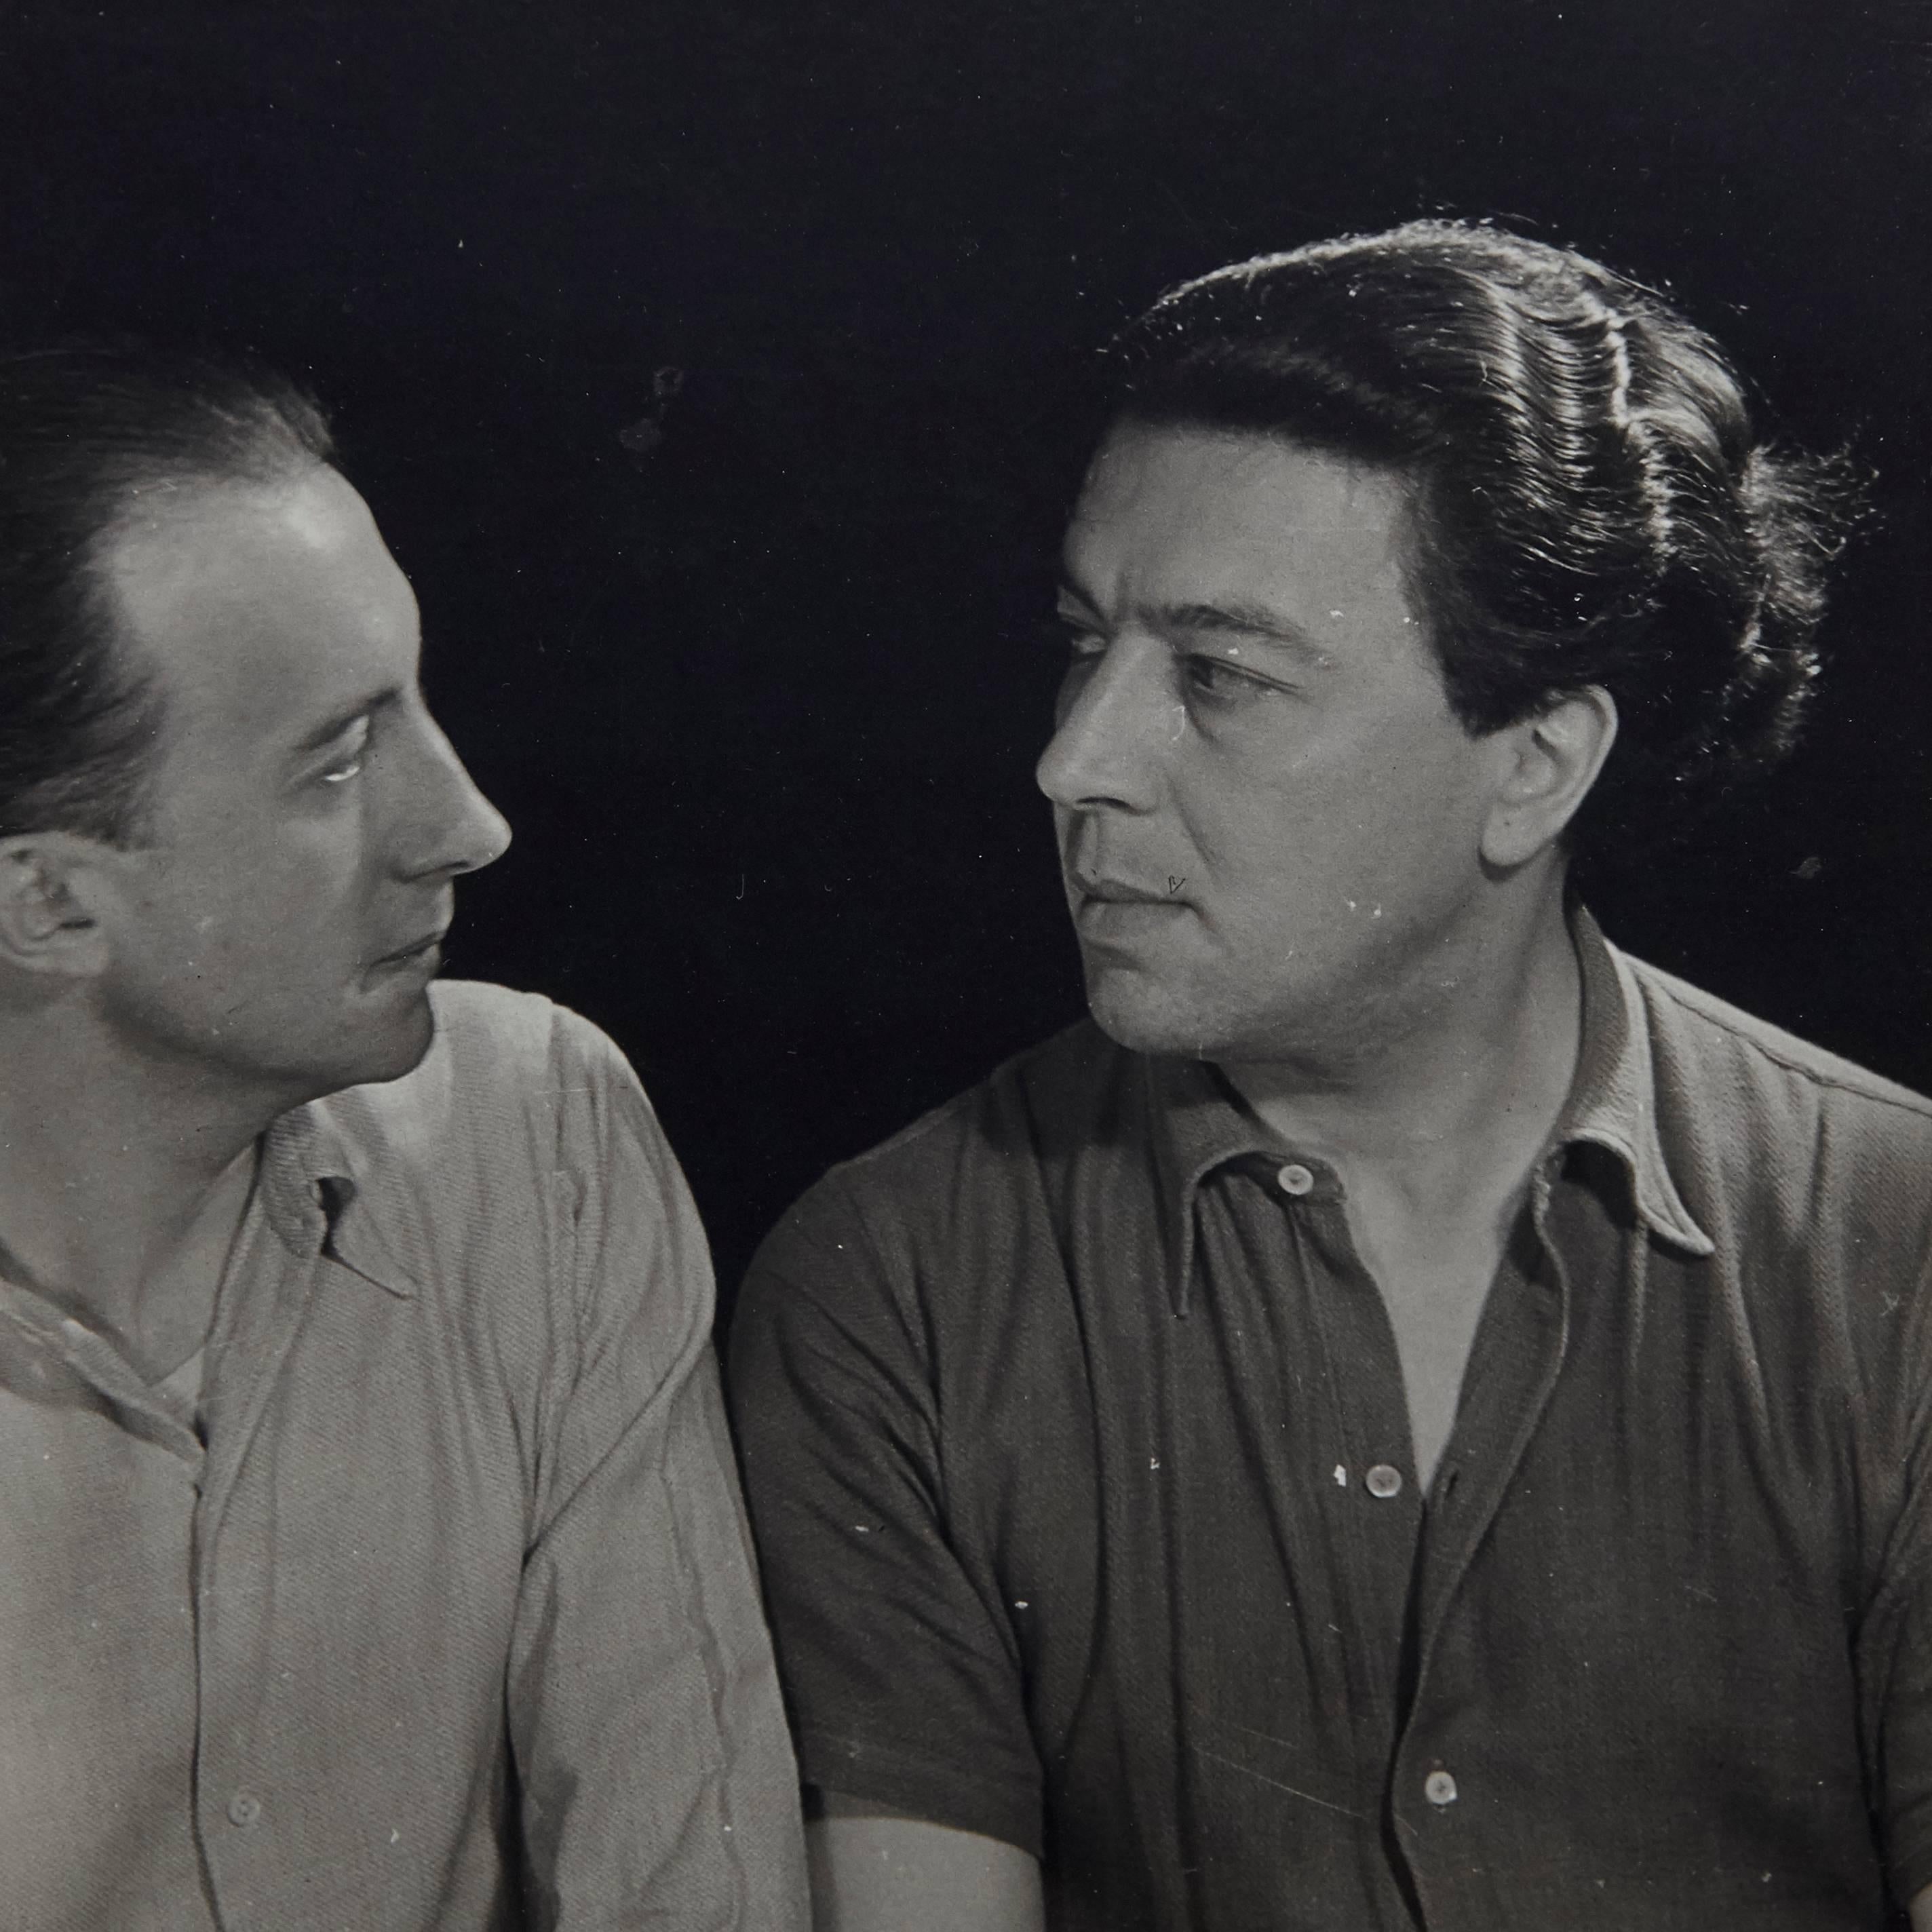 Portrait of Paul Eluard and André Breton photographed by Man Ray, 1932.

A posthumous print from the original negative in 1977 by Pierre Gassmann.

Gelatin silver bromide.

Born (Philadelphia, 1890 - Paris, 1976) Emmanuel Radnitzky, Man Ray adopted